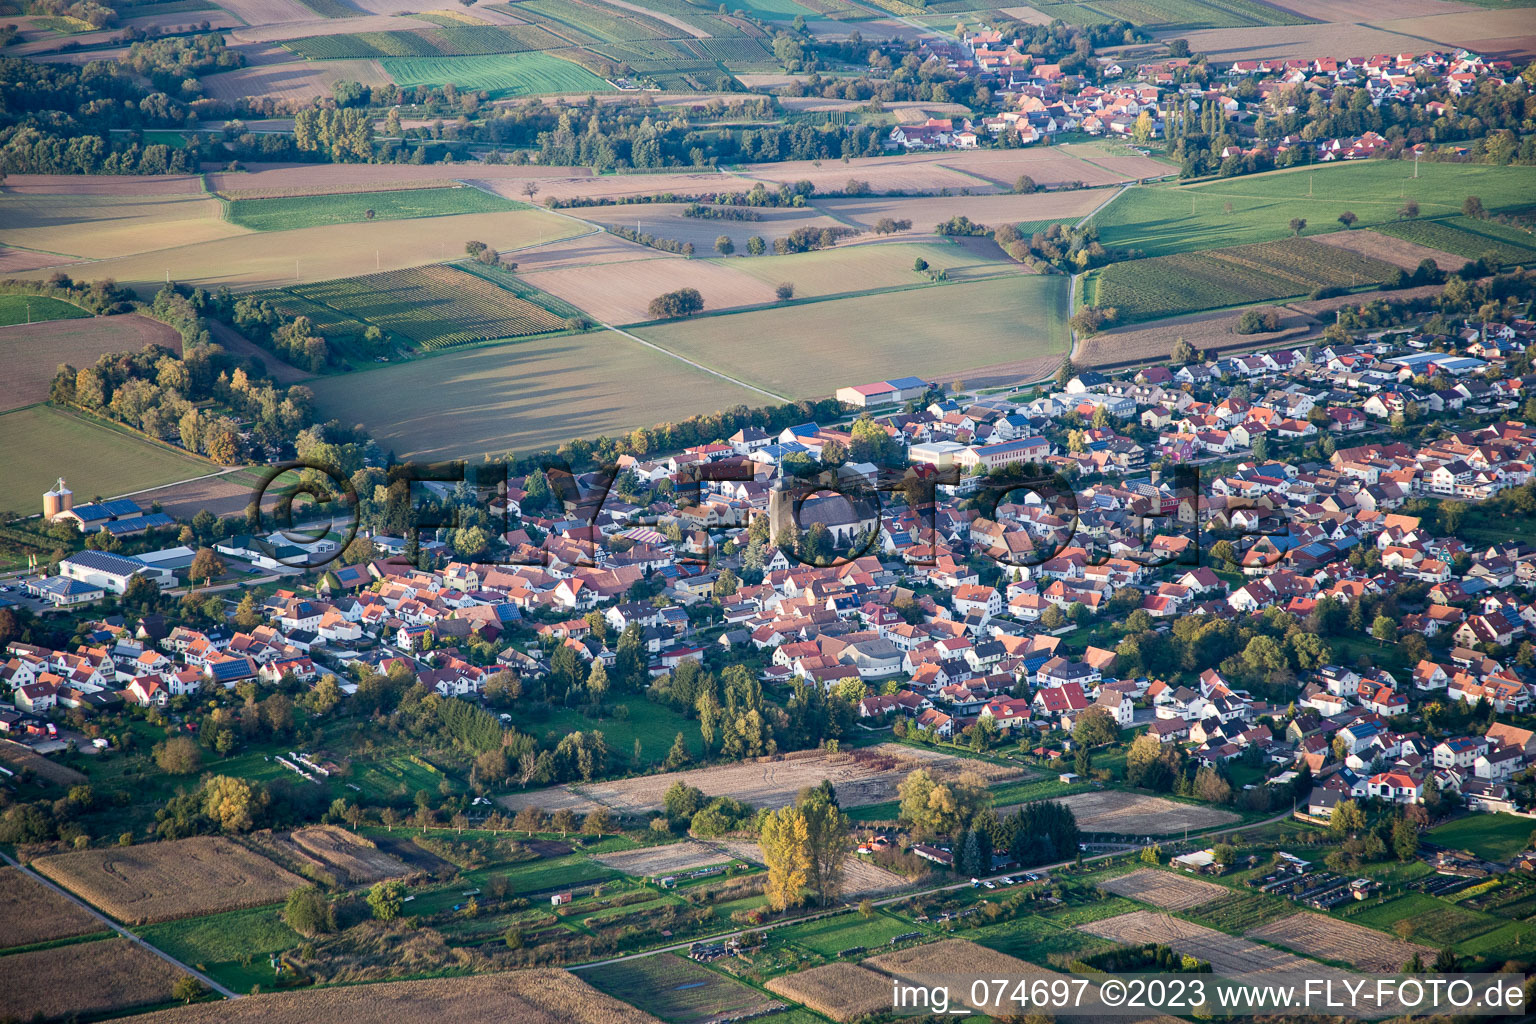 Kapsweyer in the state Rhineland-Palatinate, Germany from the plane